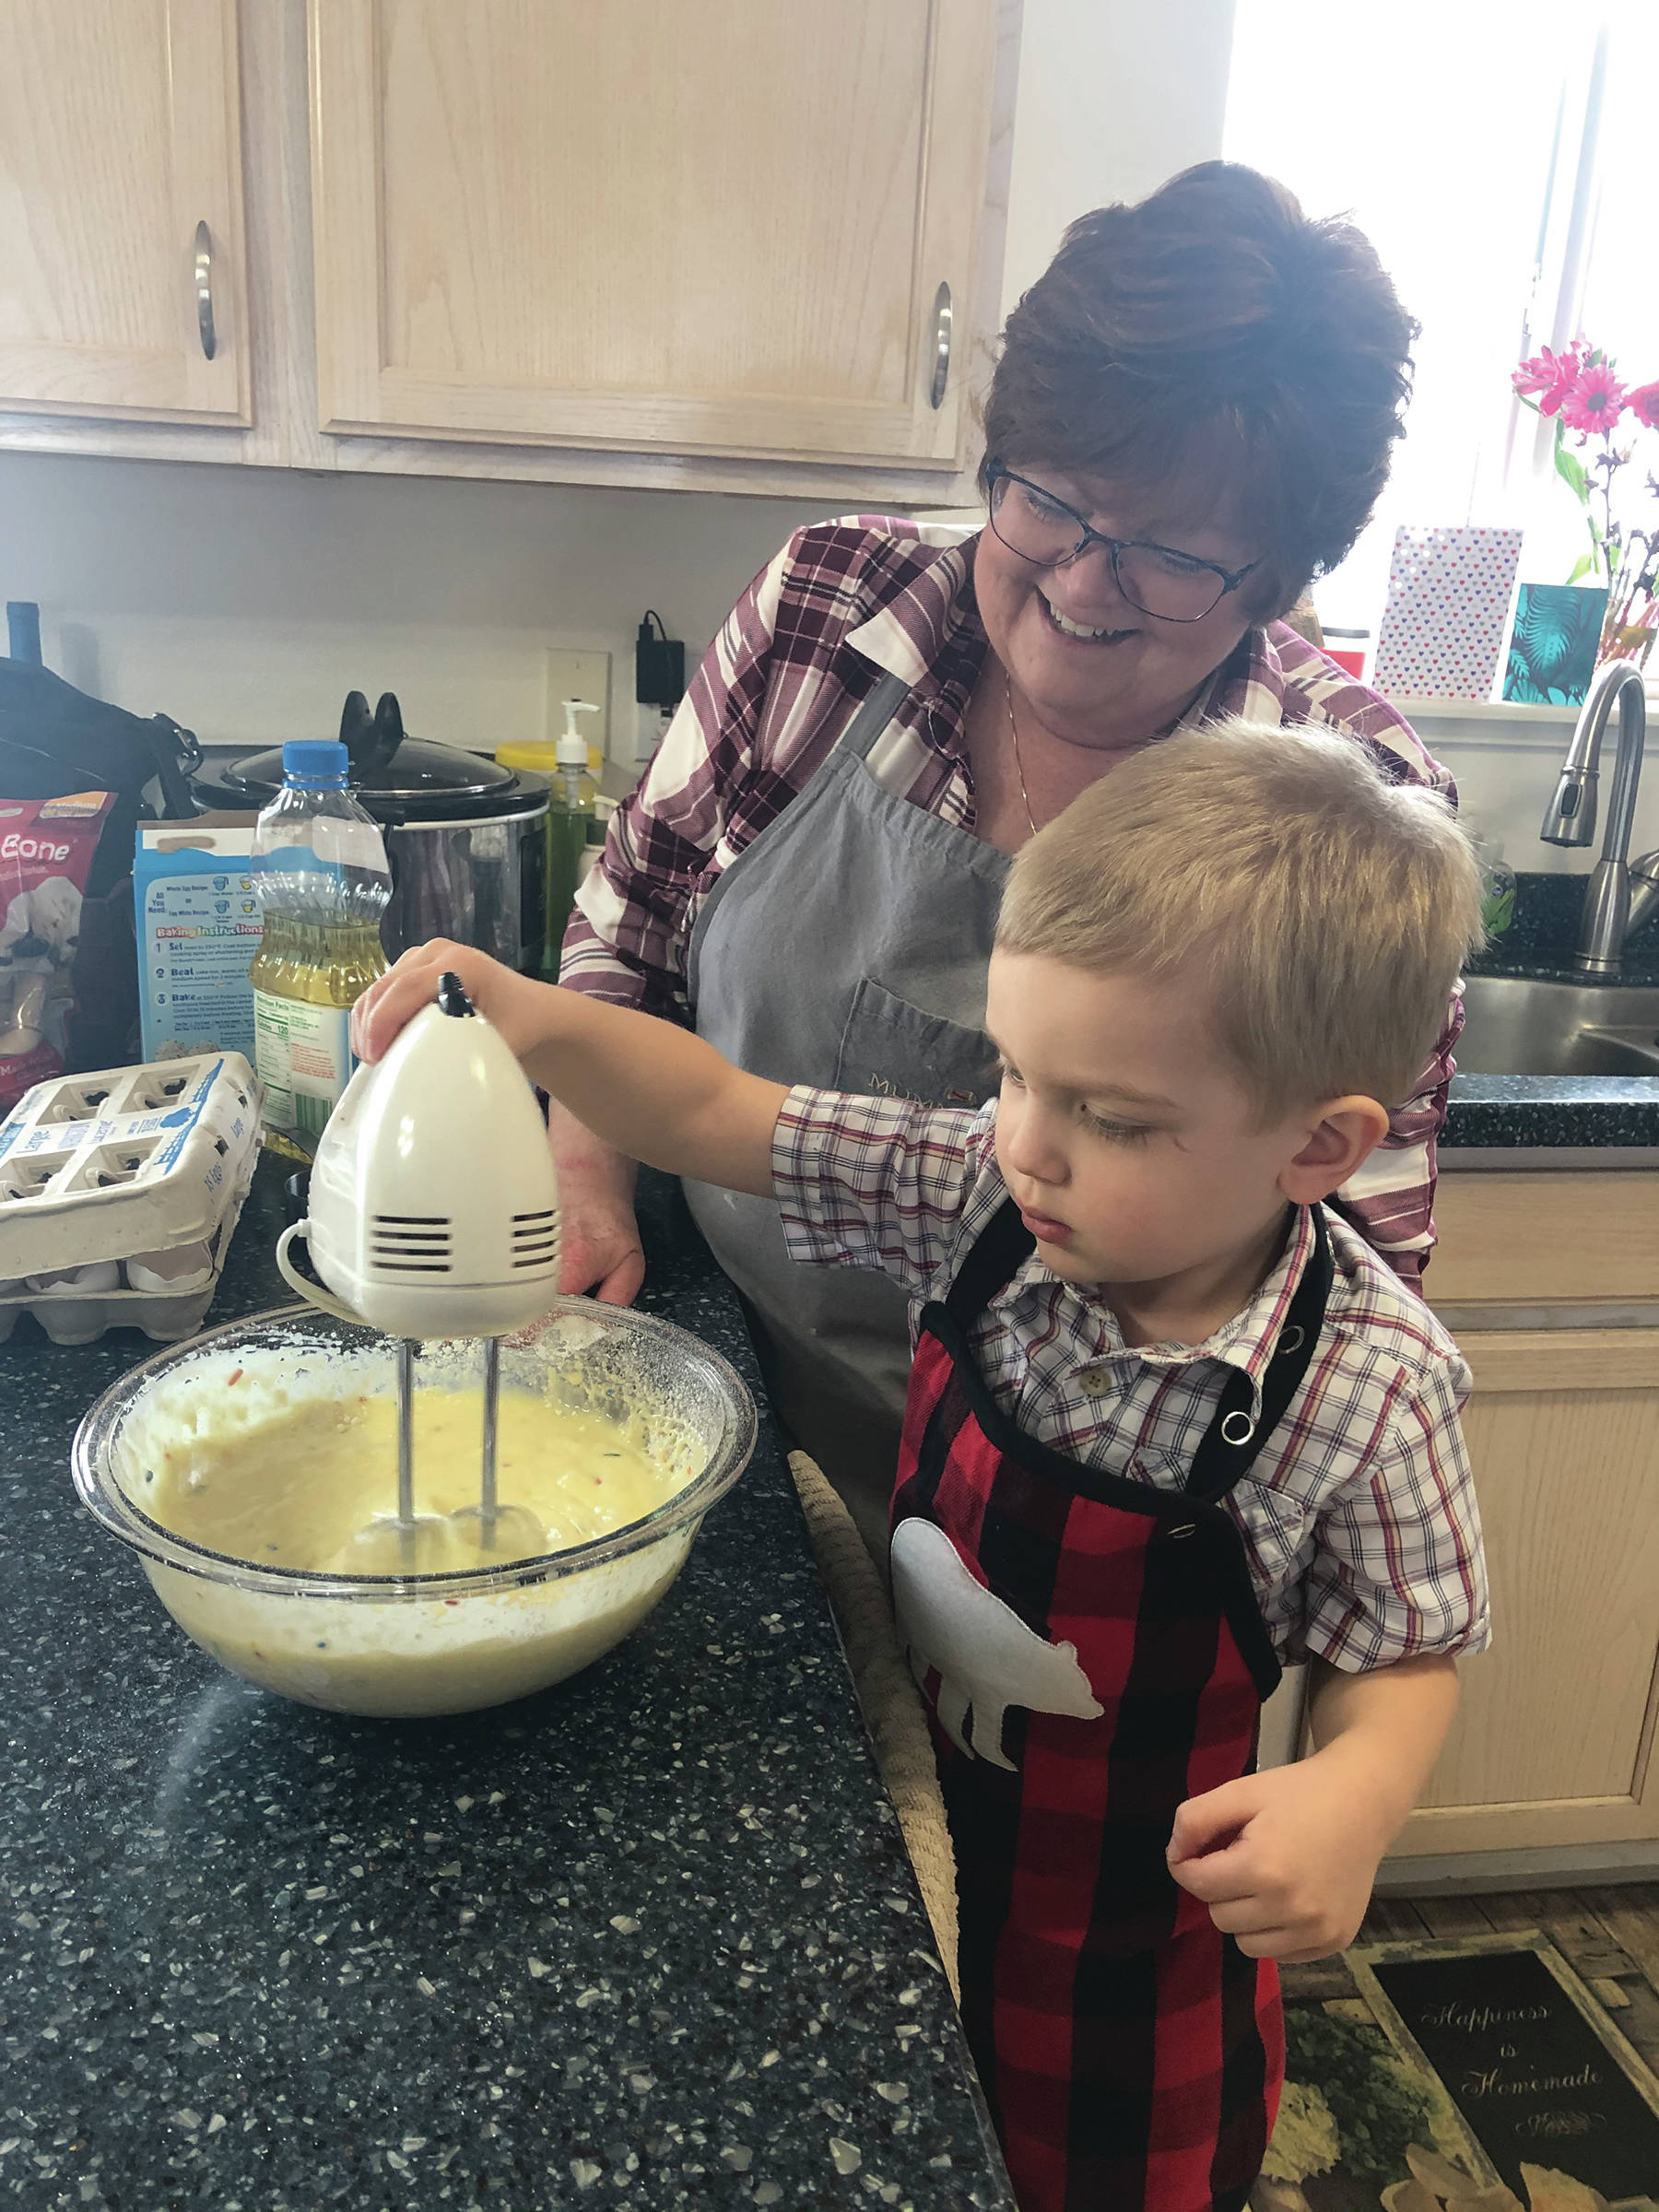 Grandson Kase and Nani, his grandmother Teri Robl, make cupcakes for his 3rd birthday on March 21, 2020, at his home in Anchorage, Alaska. (Photo courtesy Alyssa Robl)